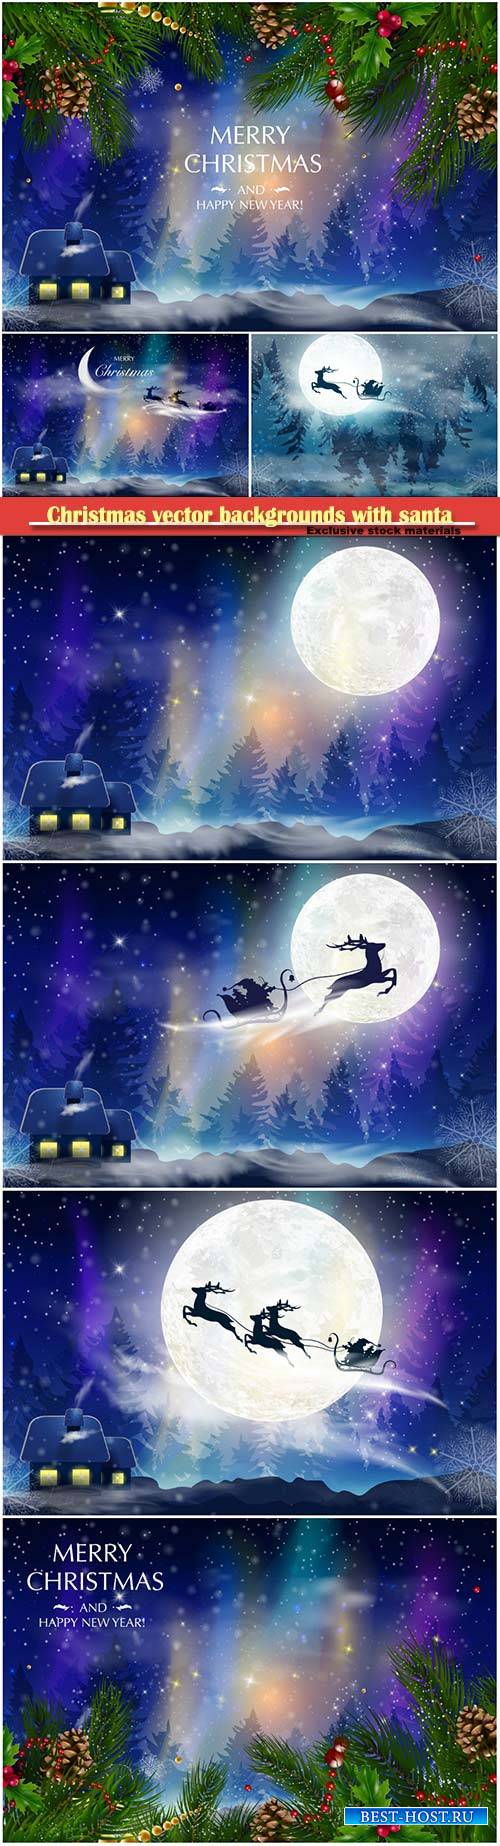 Christmas vector backgrounds with santa and deer flying through the sky